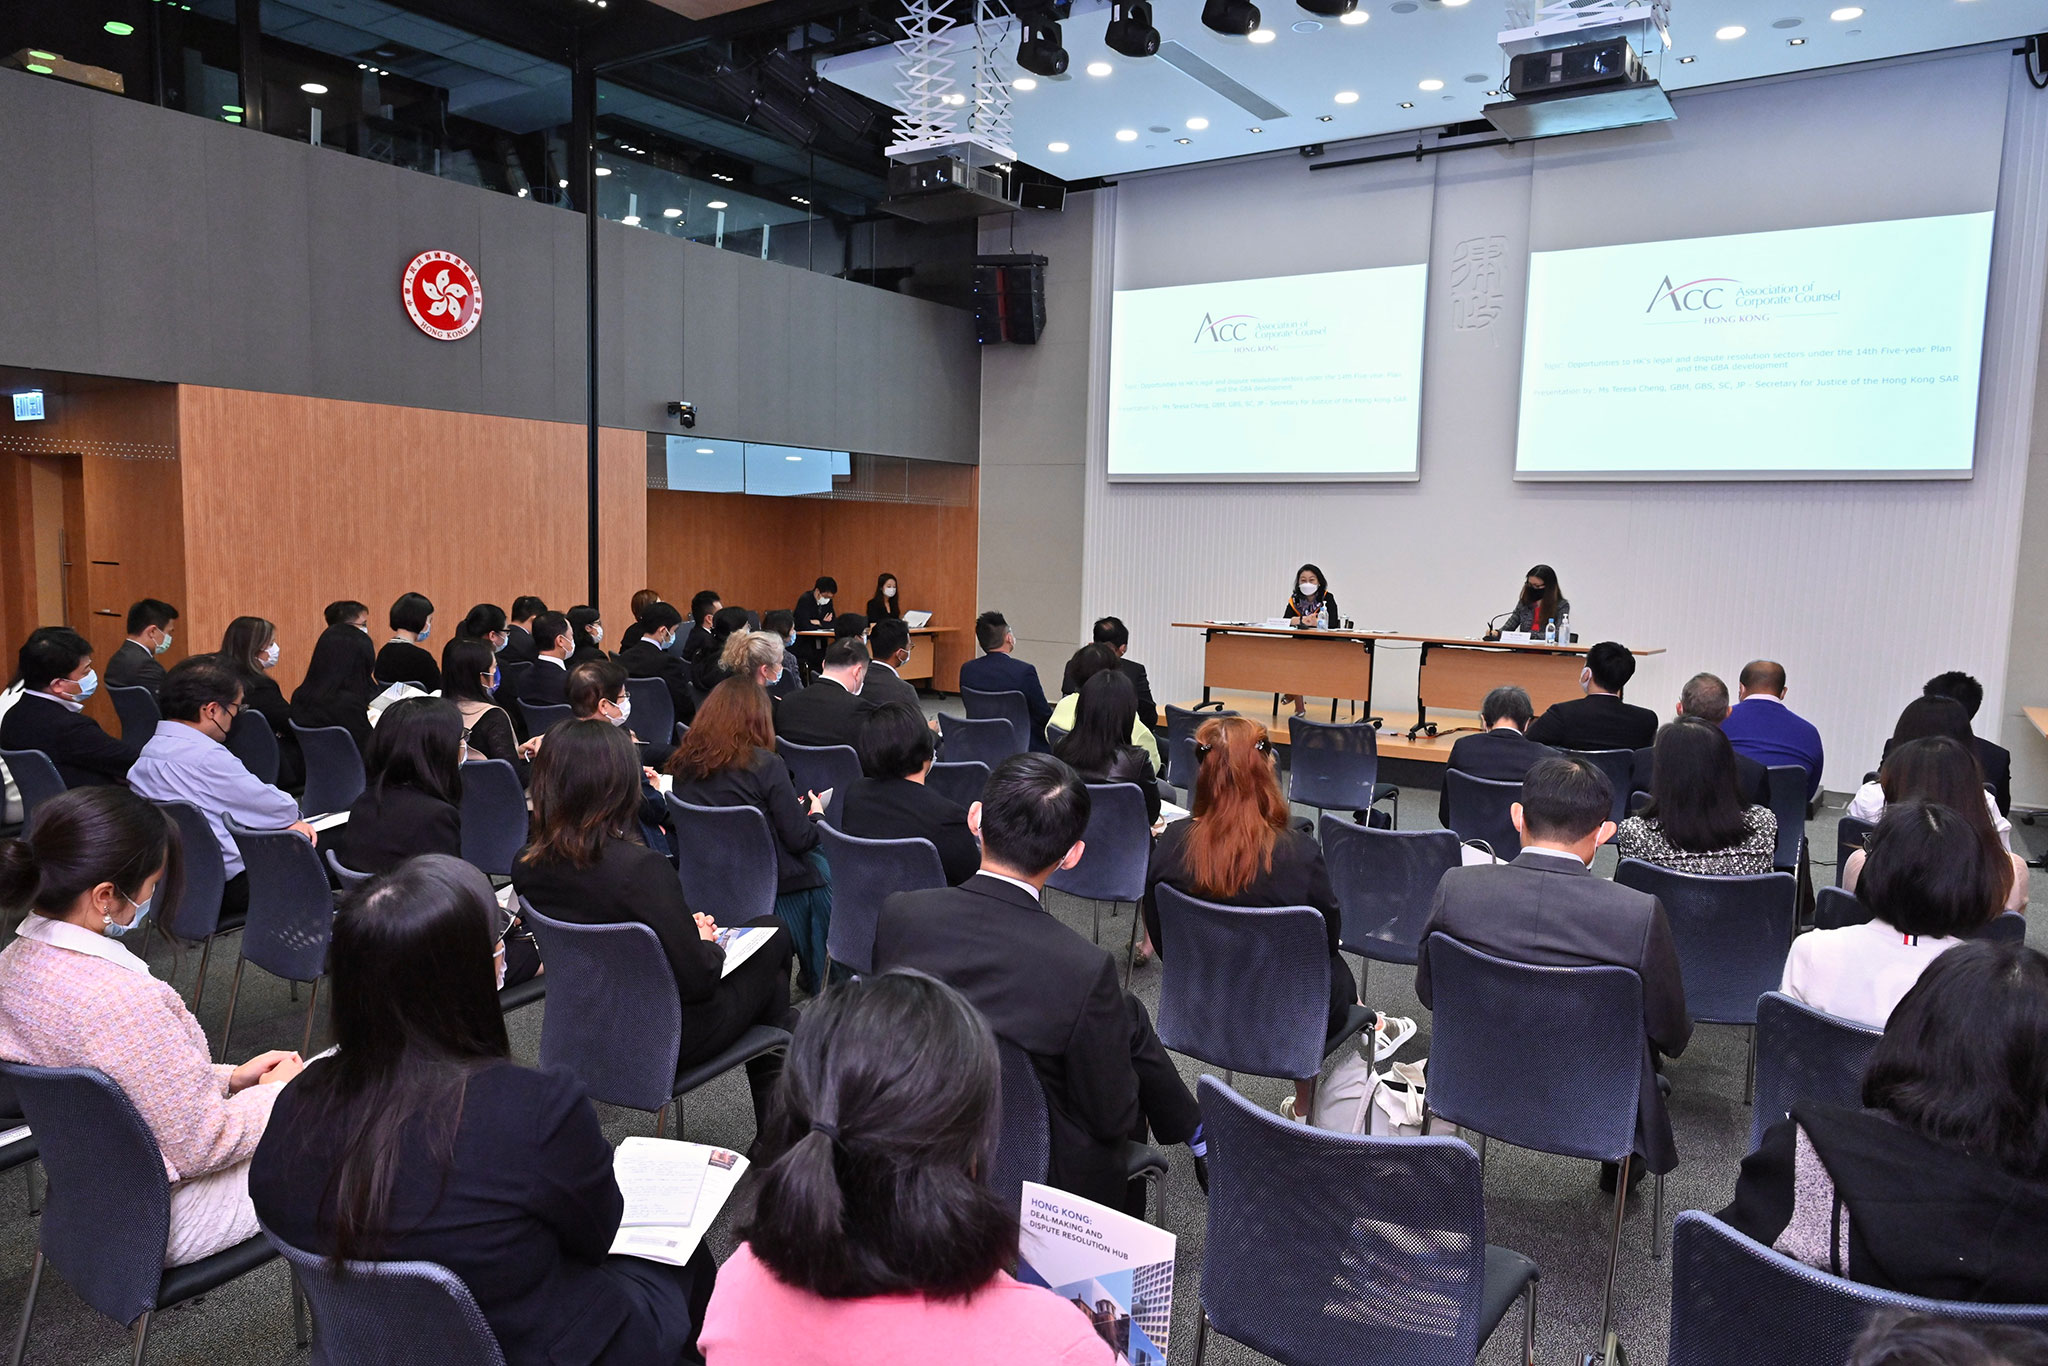 The Secretary for Justice, Ms Teresa Cheng, SC, gave a presentation on the opportunities for Hong Kong's legal and dispute resolution sectors under the national development today (December 15) at a seminar organised by the Association of Corporate Counsel Hong Kong. Photo shows Ms Cheng speaking to the participants, who are corporate counsel from multinational corporations, statutory bodies, financial services and other professional sectors.